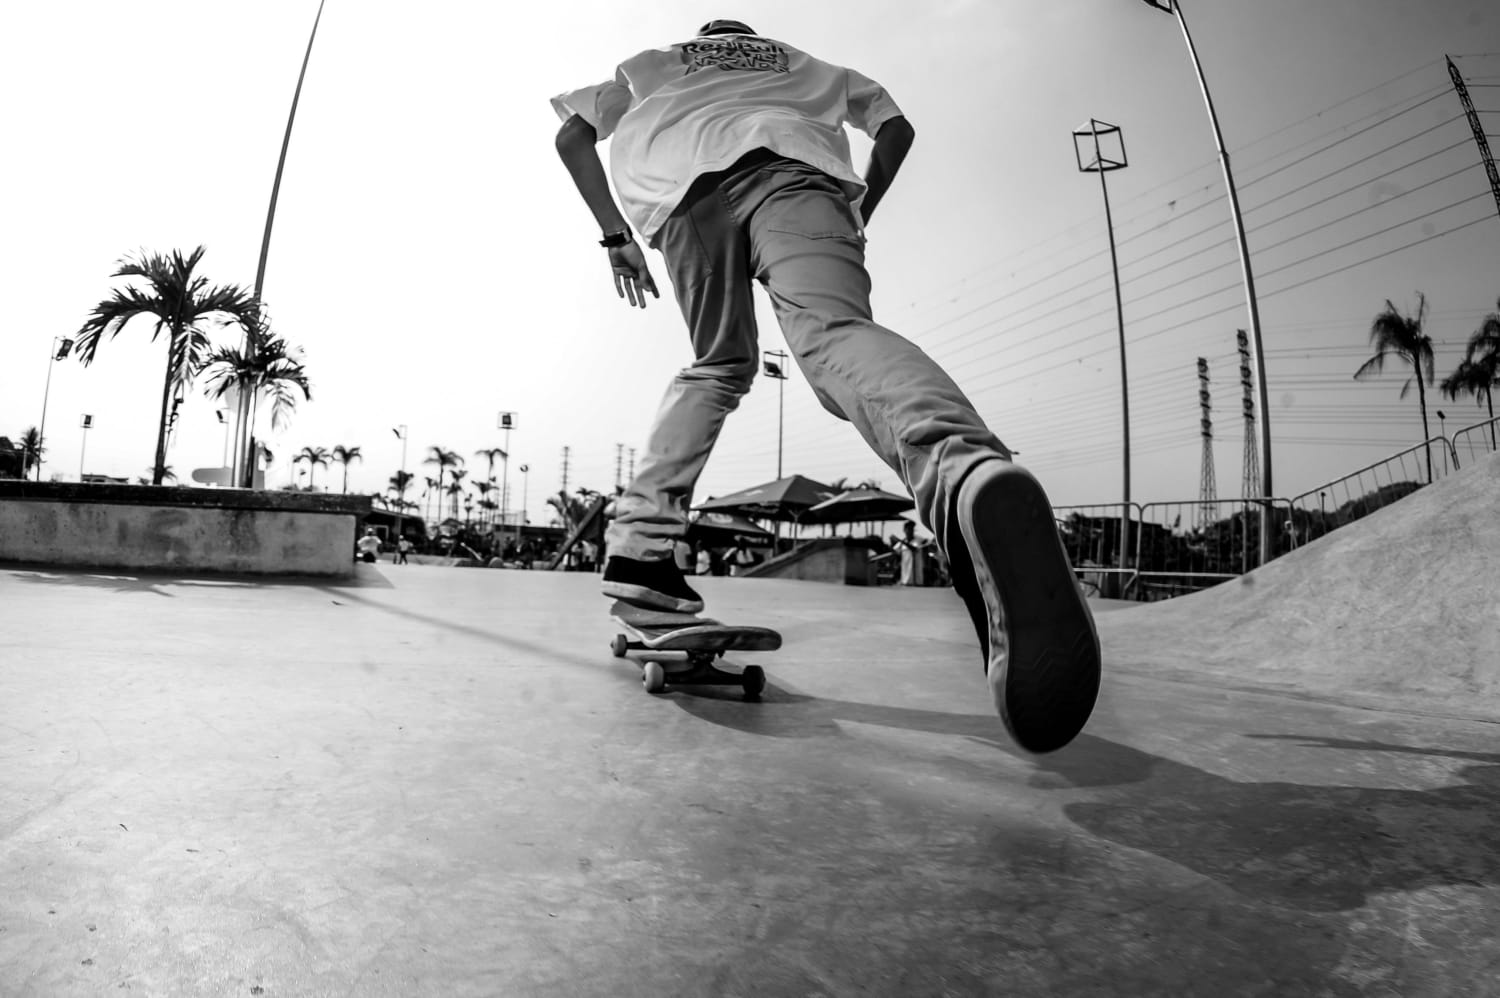 What's the deal about skateboarding?